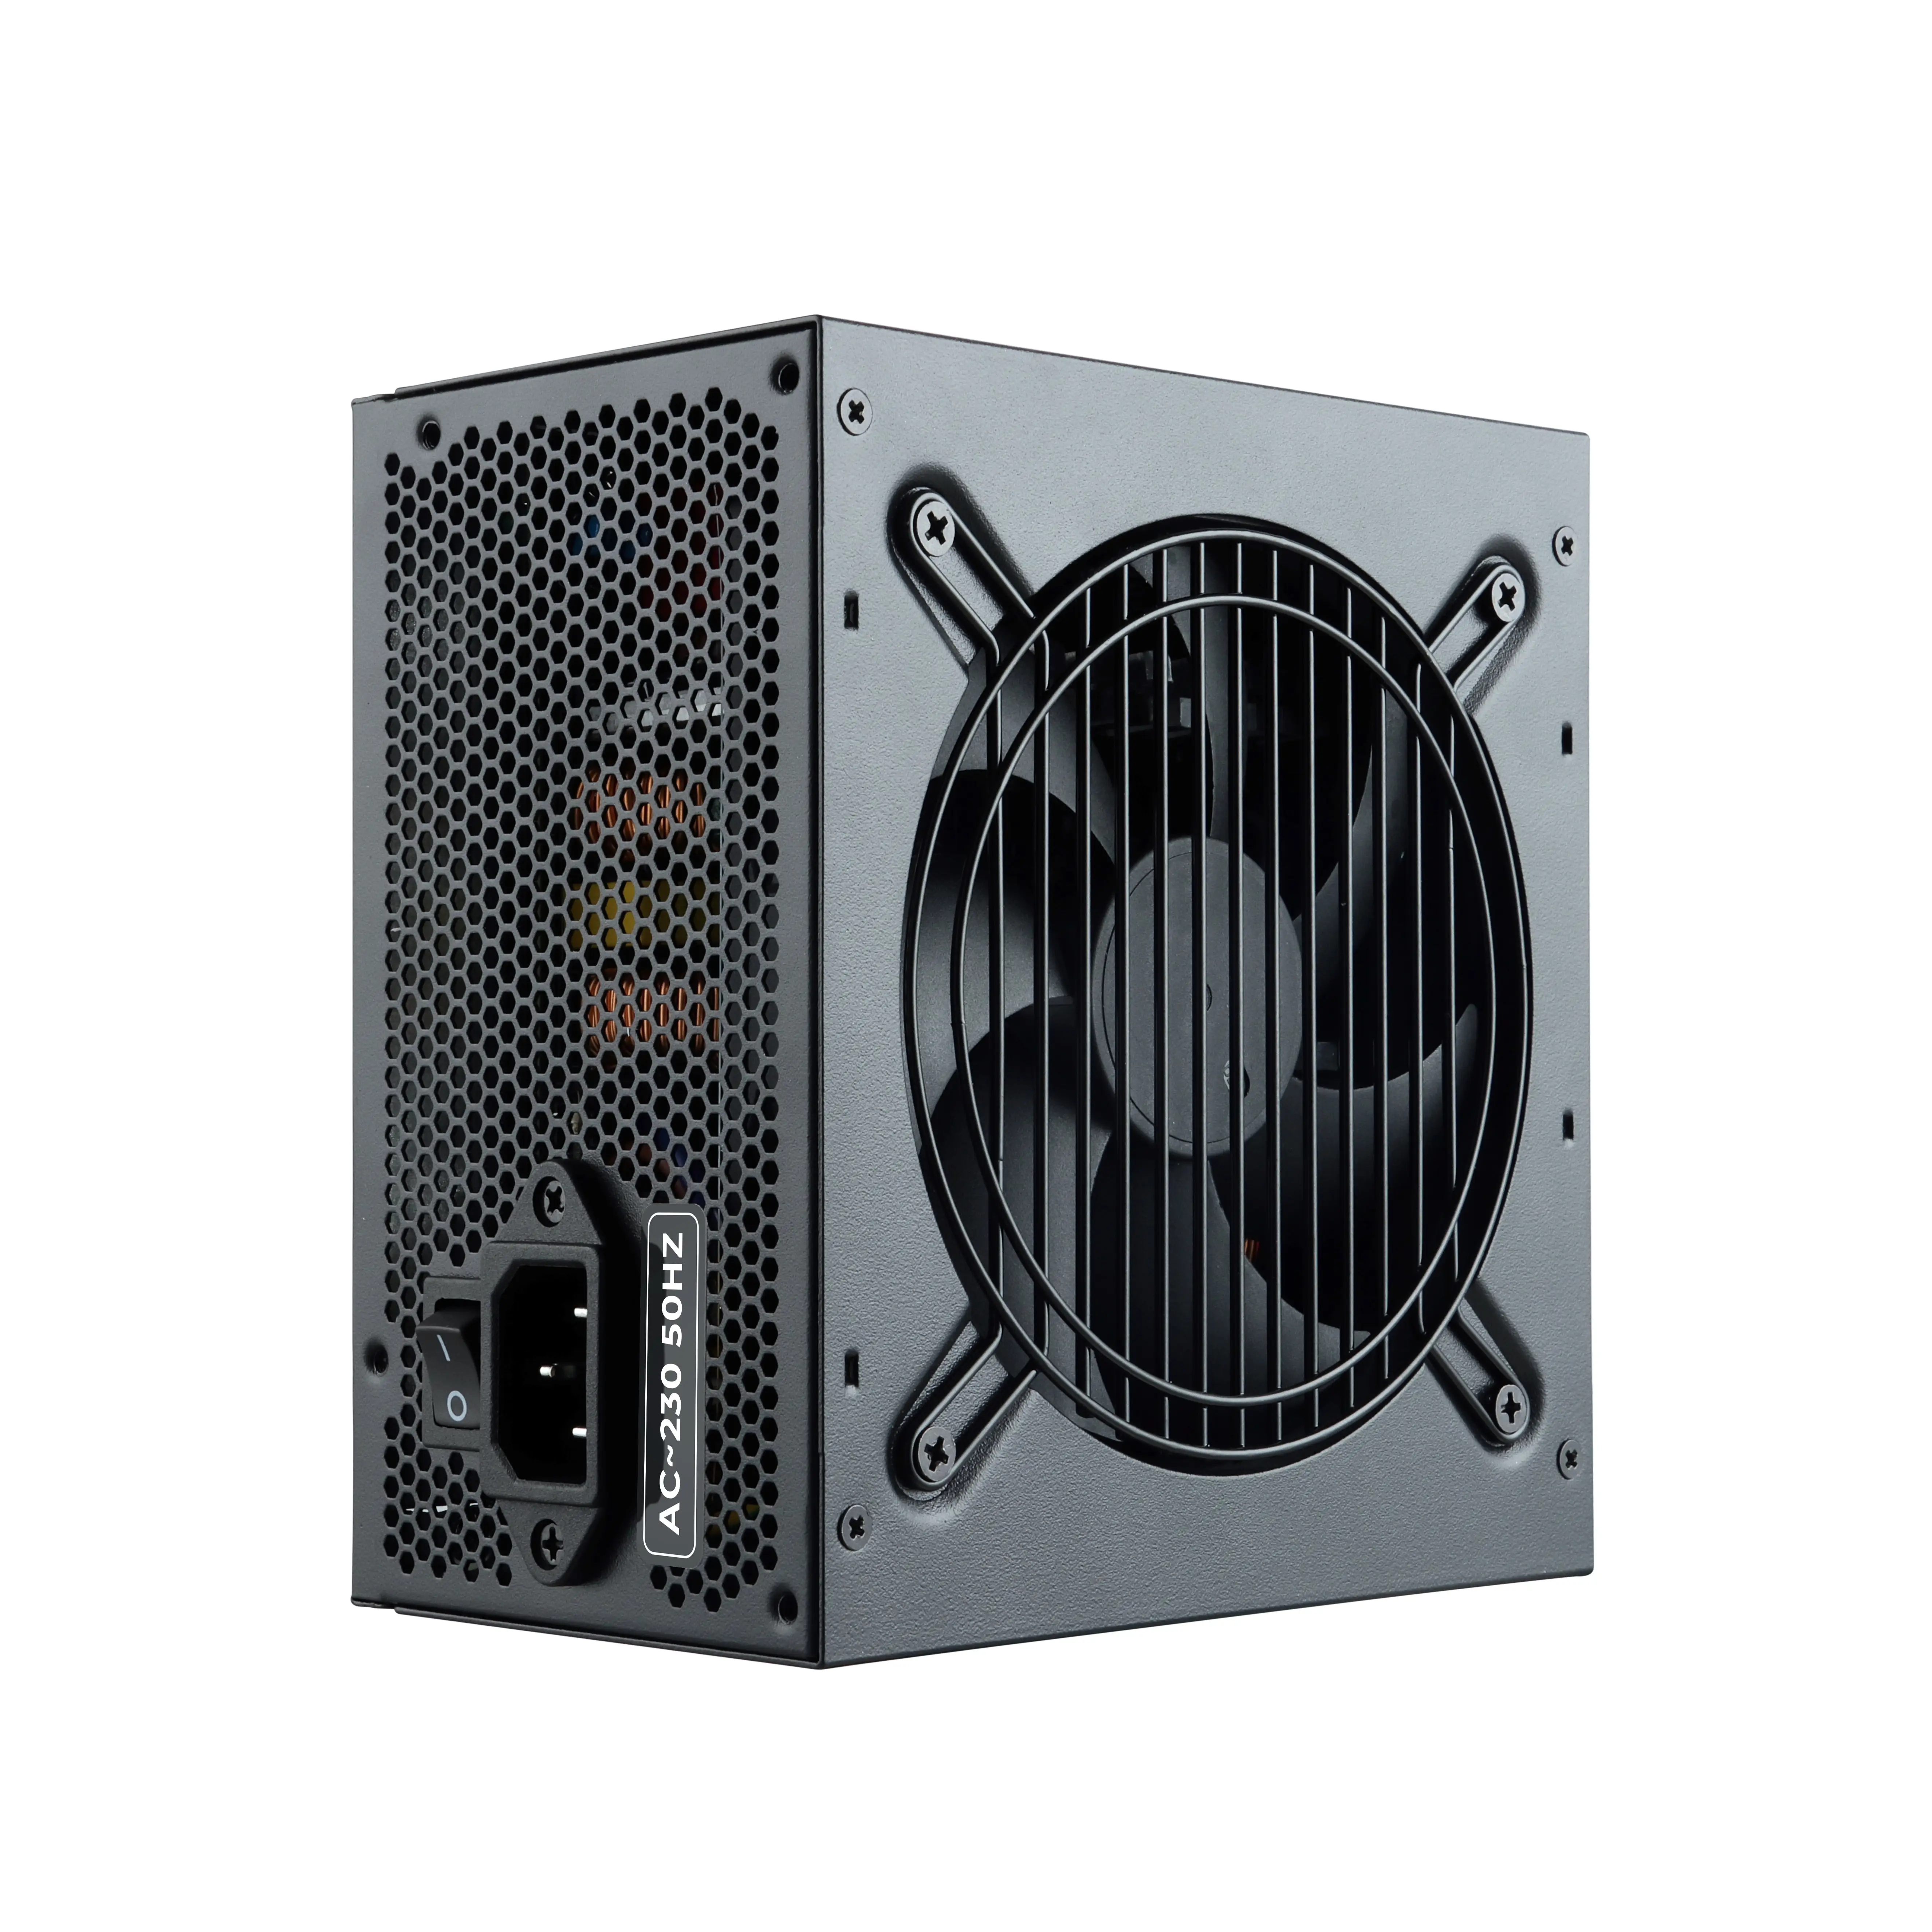 New Design power supply 600w pc Atx Power Supply with fan Speed Control for Pc Gaming case